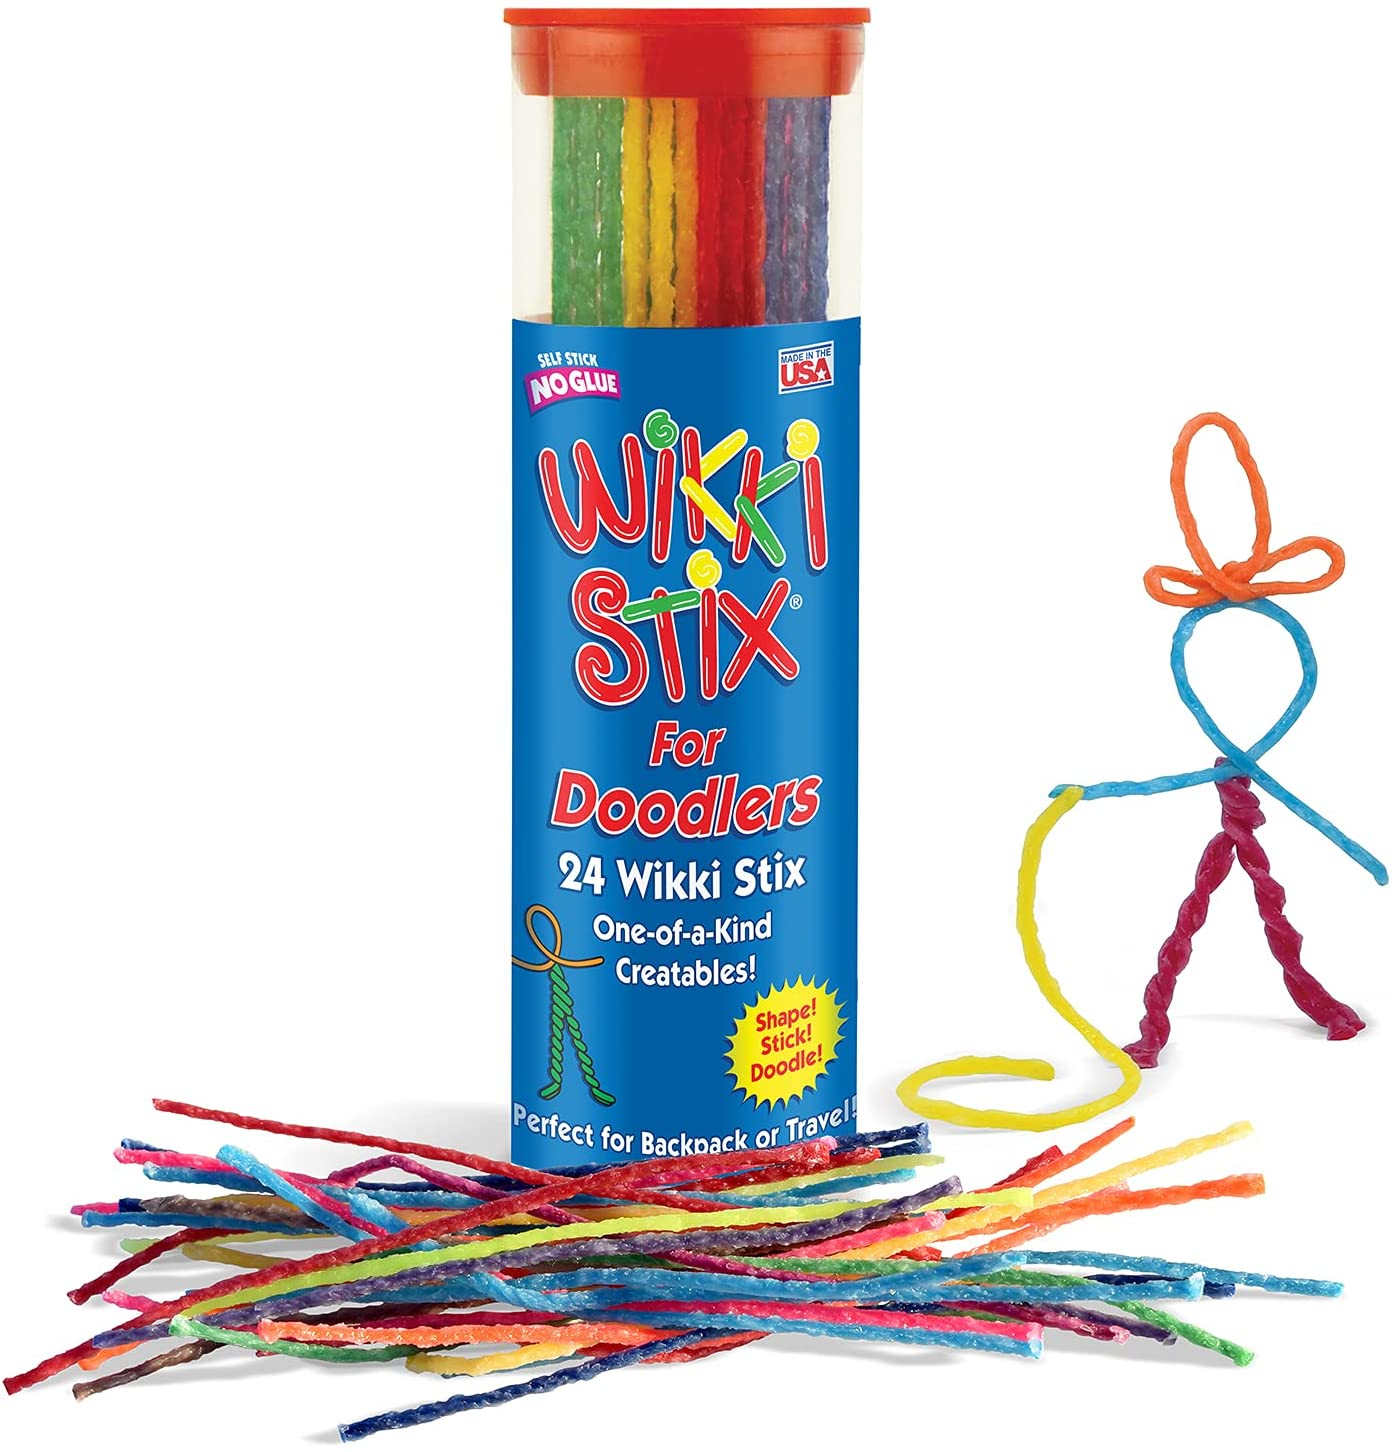 Sensory Fidget Toy, Arts and Crafts for Kids, Non-Toxic, Waxed Yarn, 6 Inch, Reusable Molding and Sculpting Sticks, American, Assorted Colors, 24 Count (Pack of 1), Multi